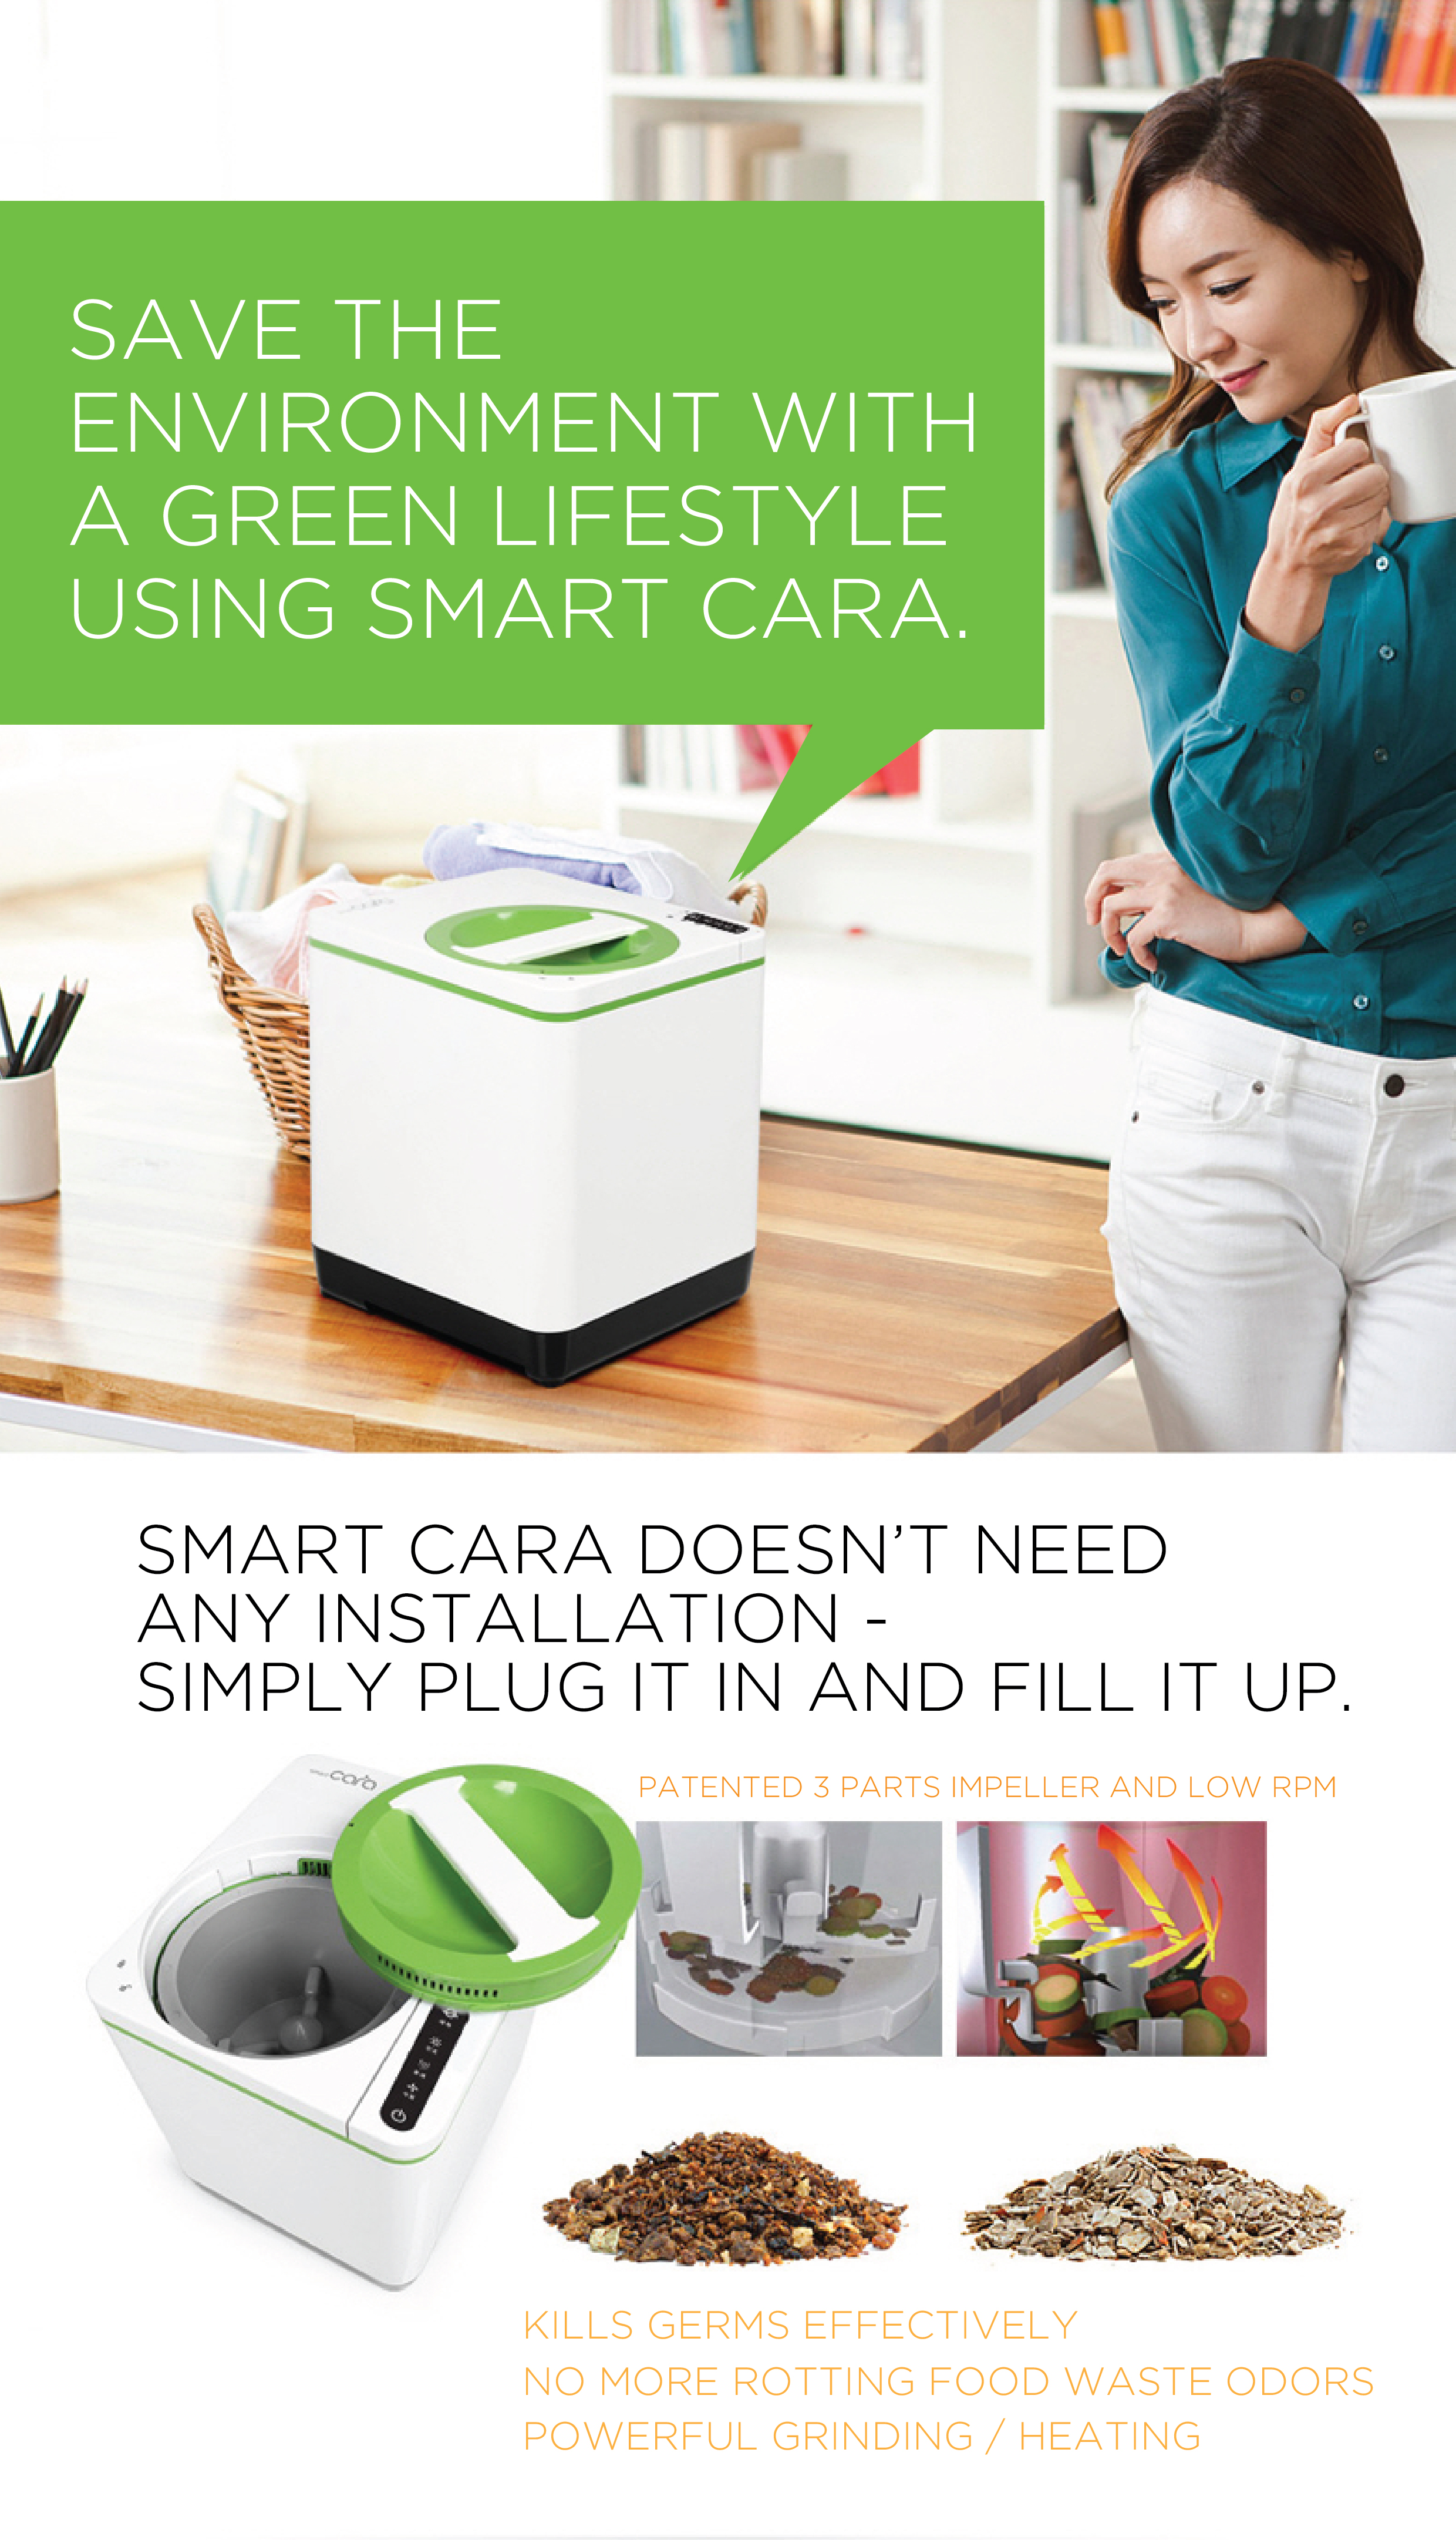 Smart Cara present state of the art food composter